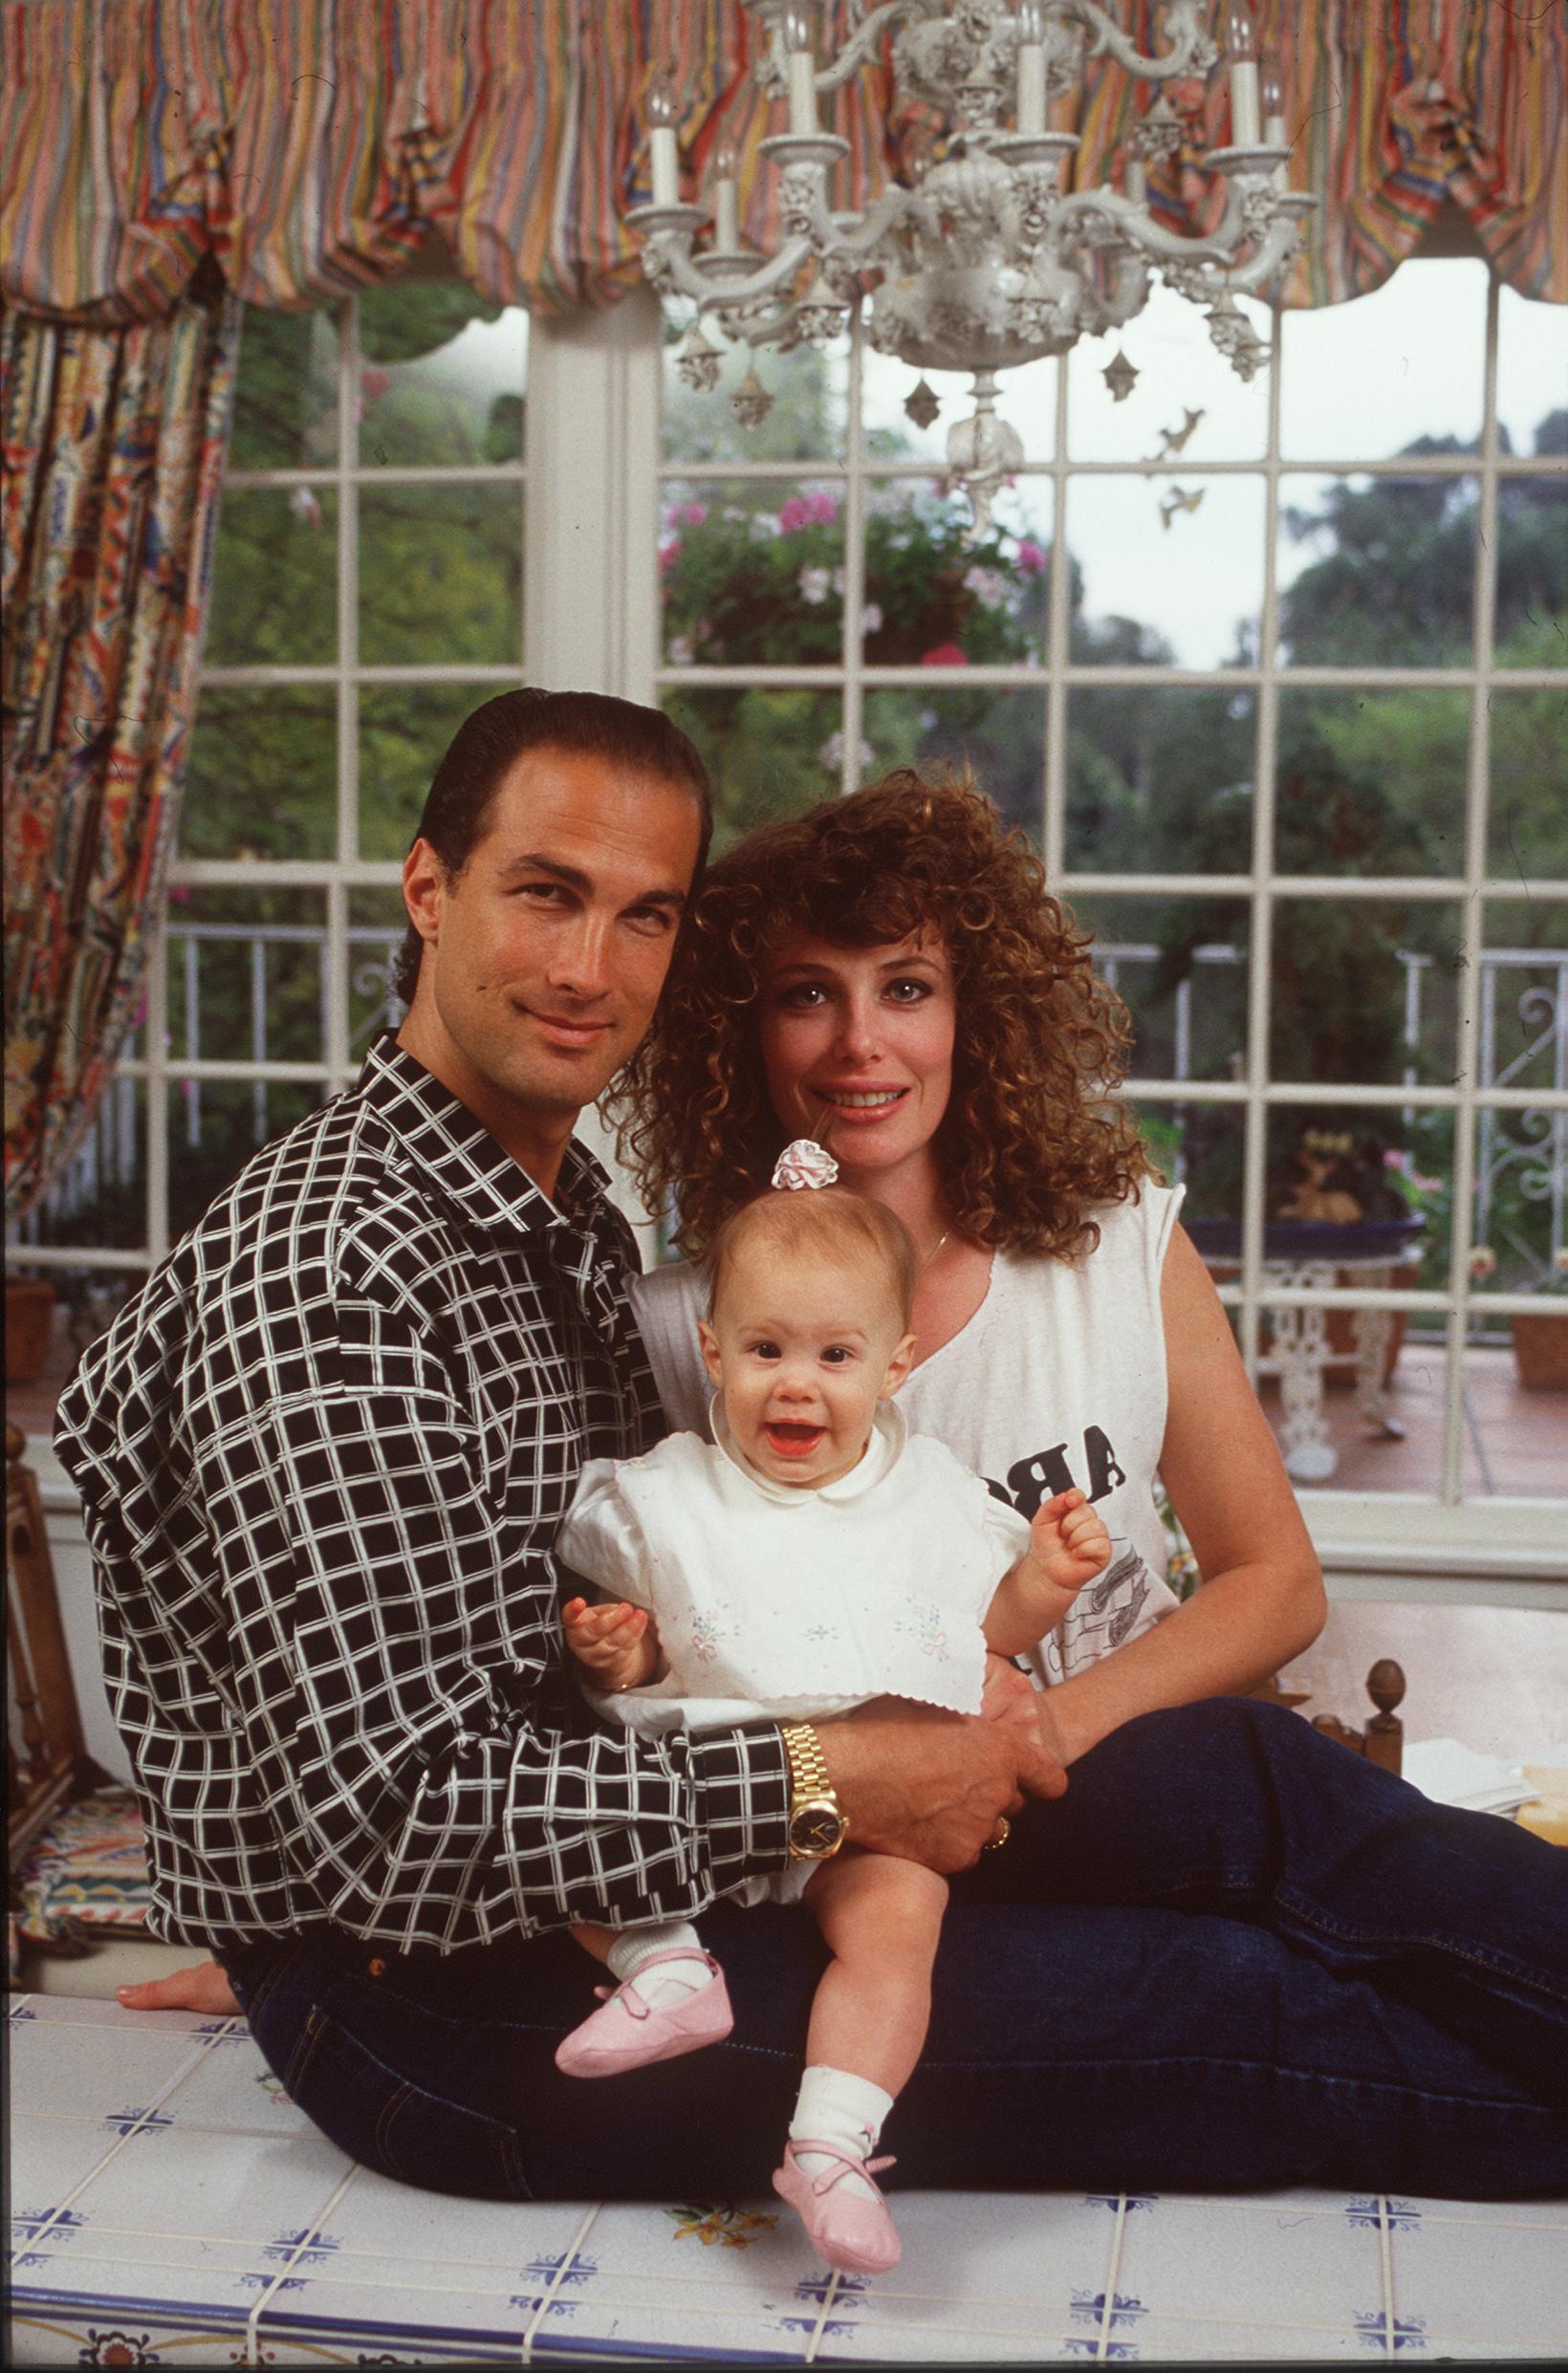 Steven Seagal and his wife, actress Kelly LeBrock pictured at home with their first child in 1989 Beverly Hills, California. / Source: Getty Images